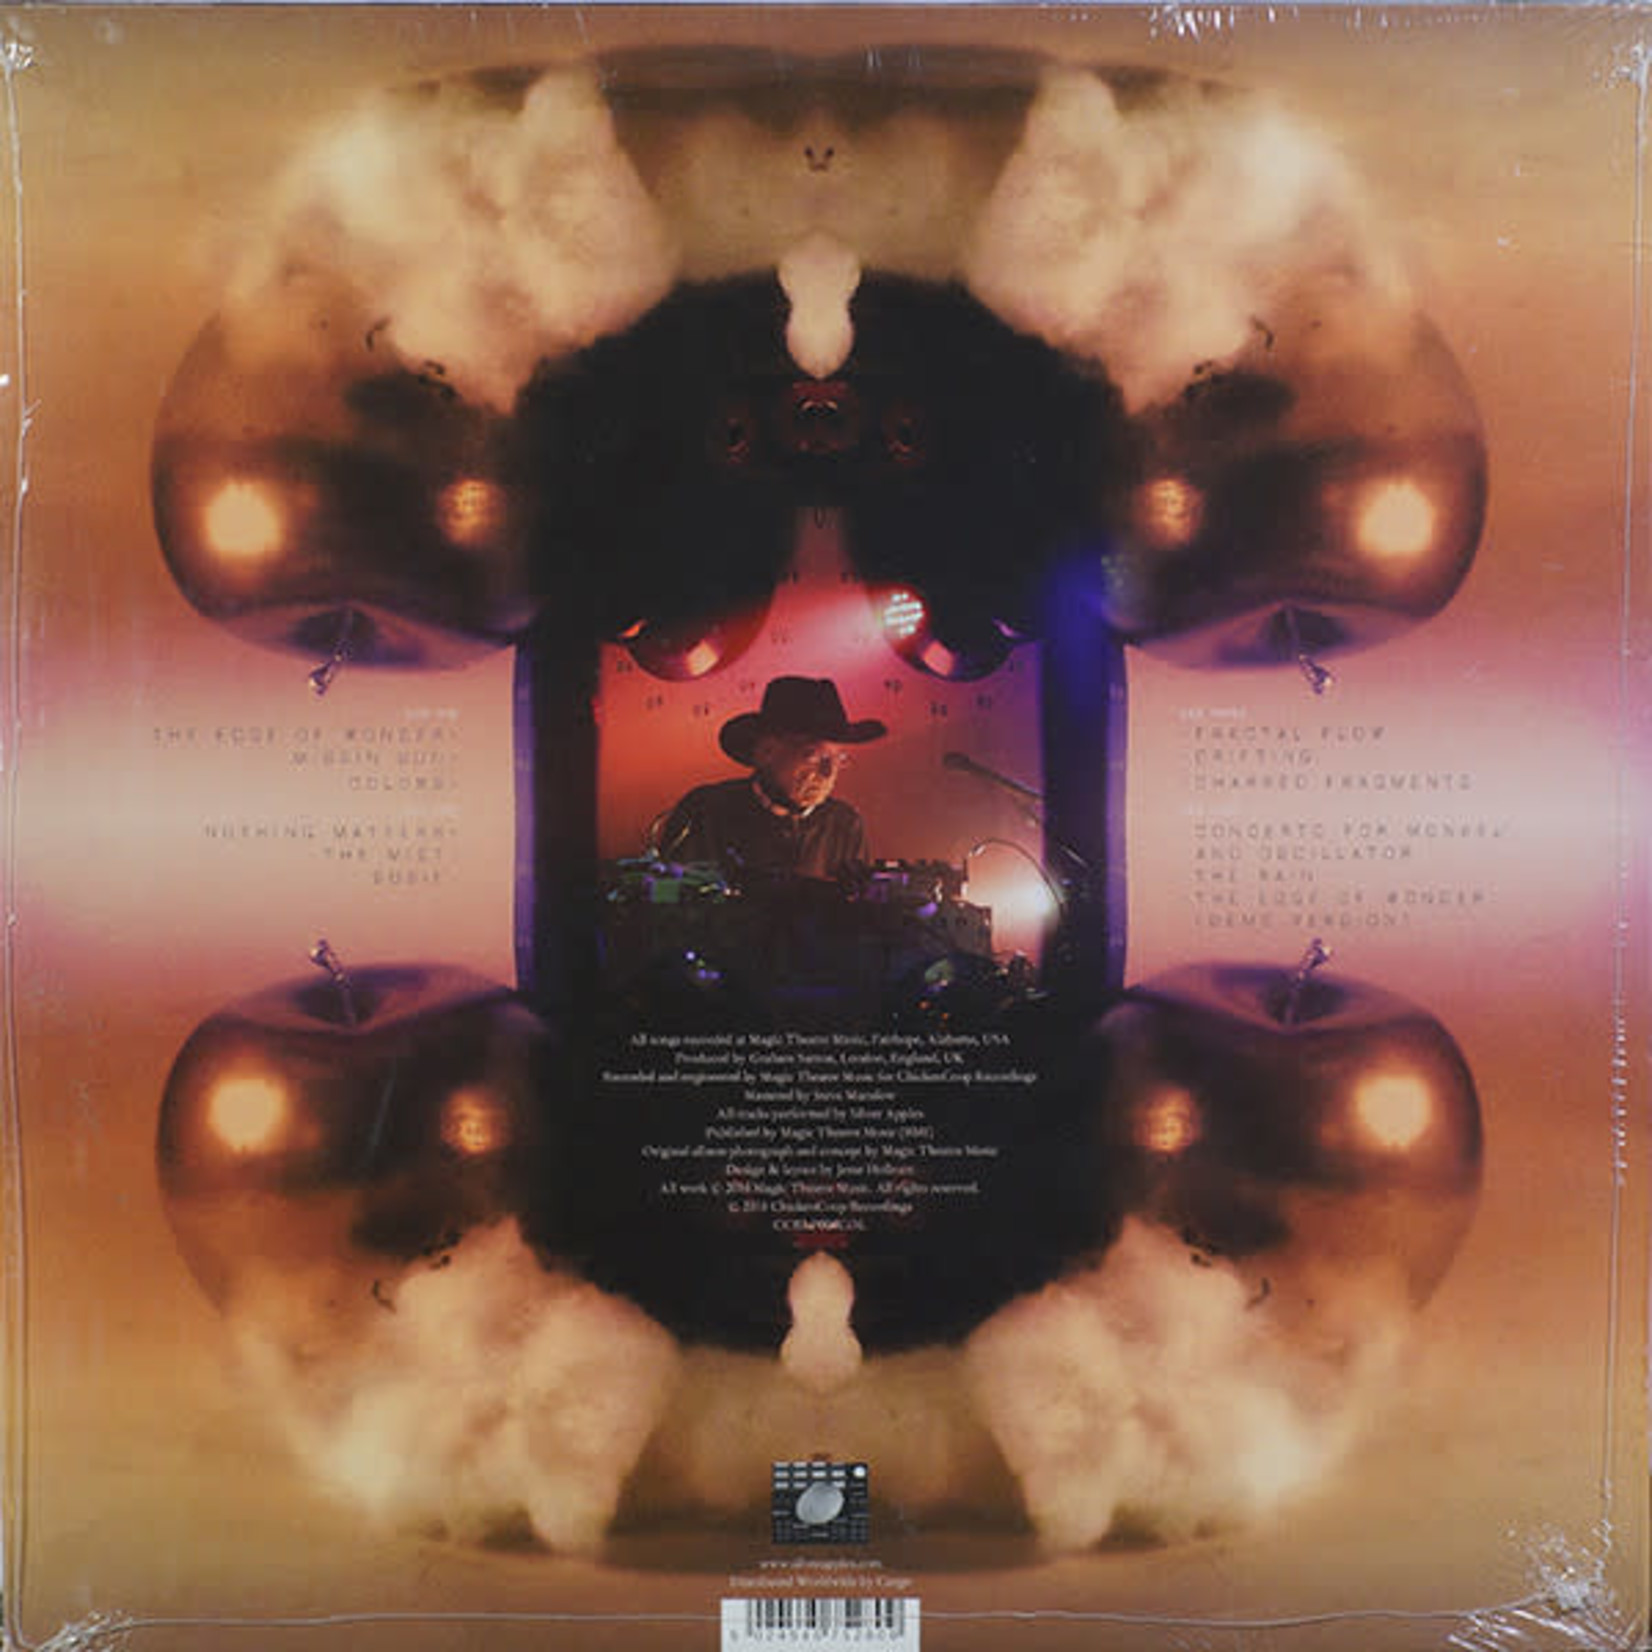 Silver Apples - Clinging To A Dream (2LP) [White/Purple]